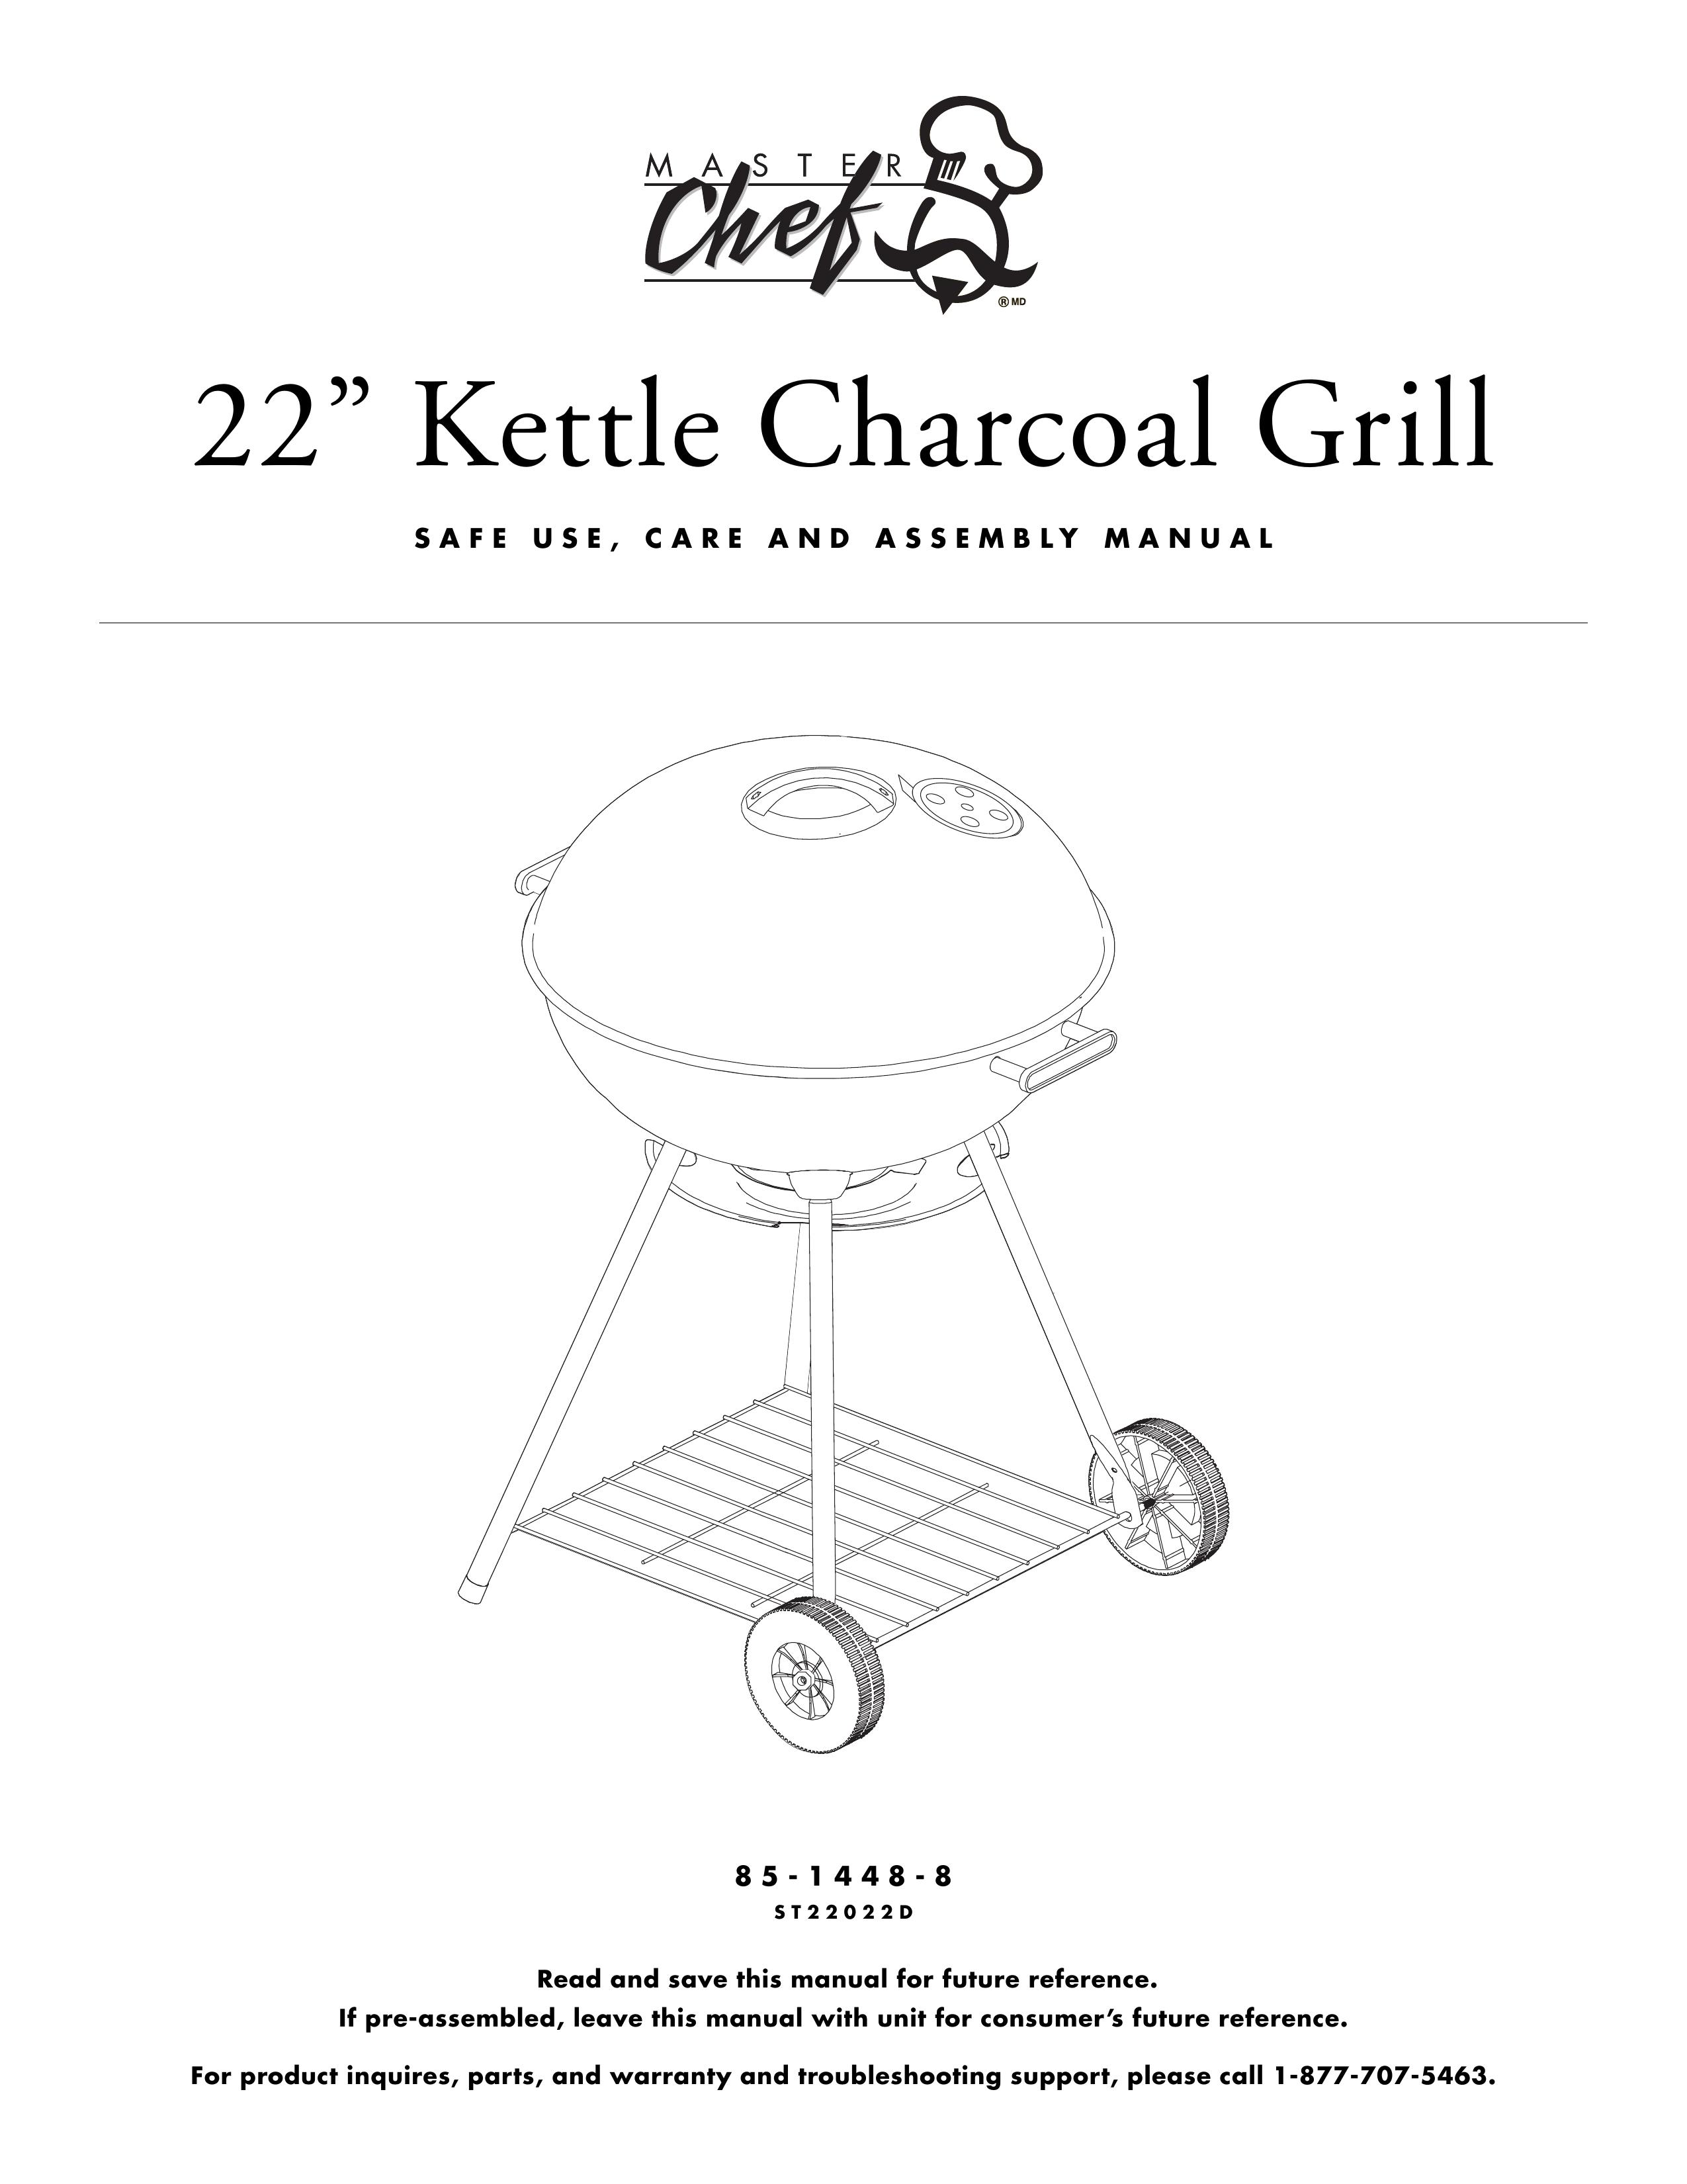 Master Chef MAS 008 Charcoal Grill User Manual